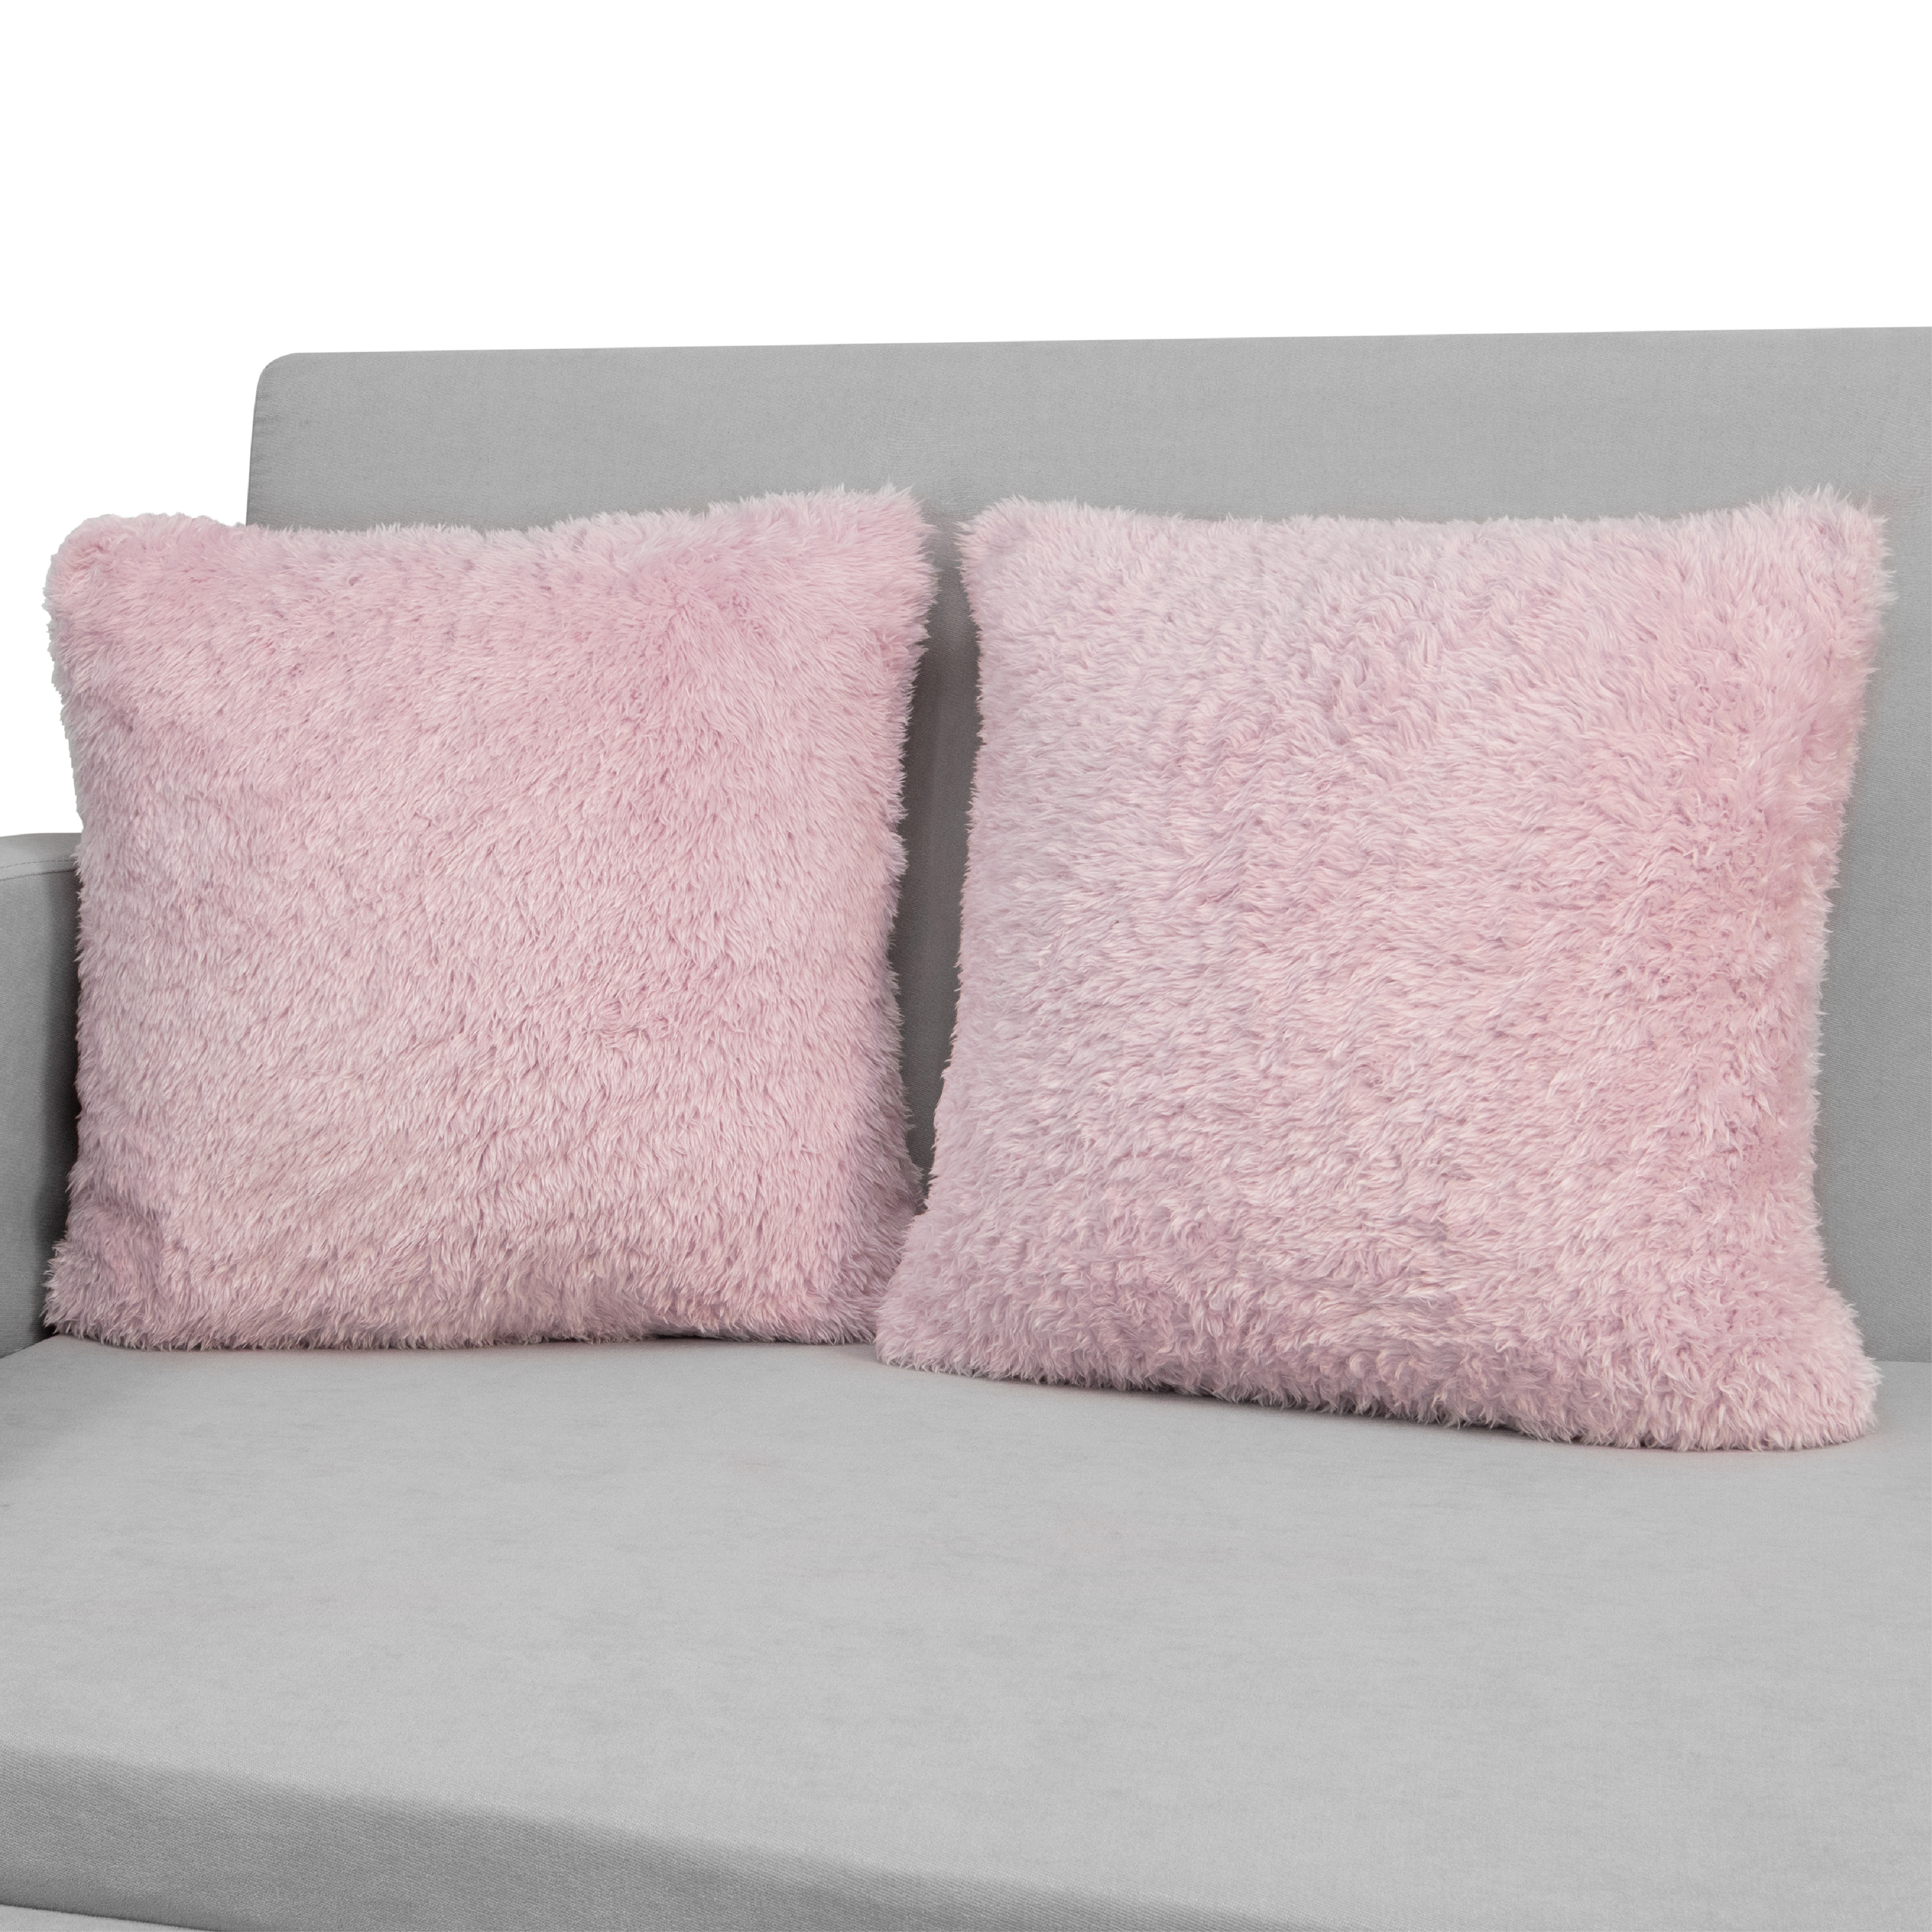 Throw Pillow Covers Set of 2 Sofa Decor Fuzzy Cushion Cases 2 Sizes with Zipper